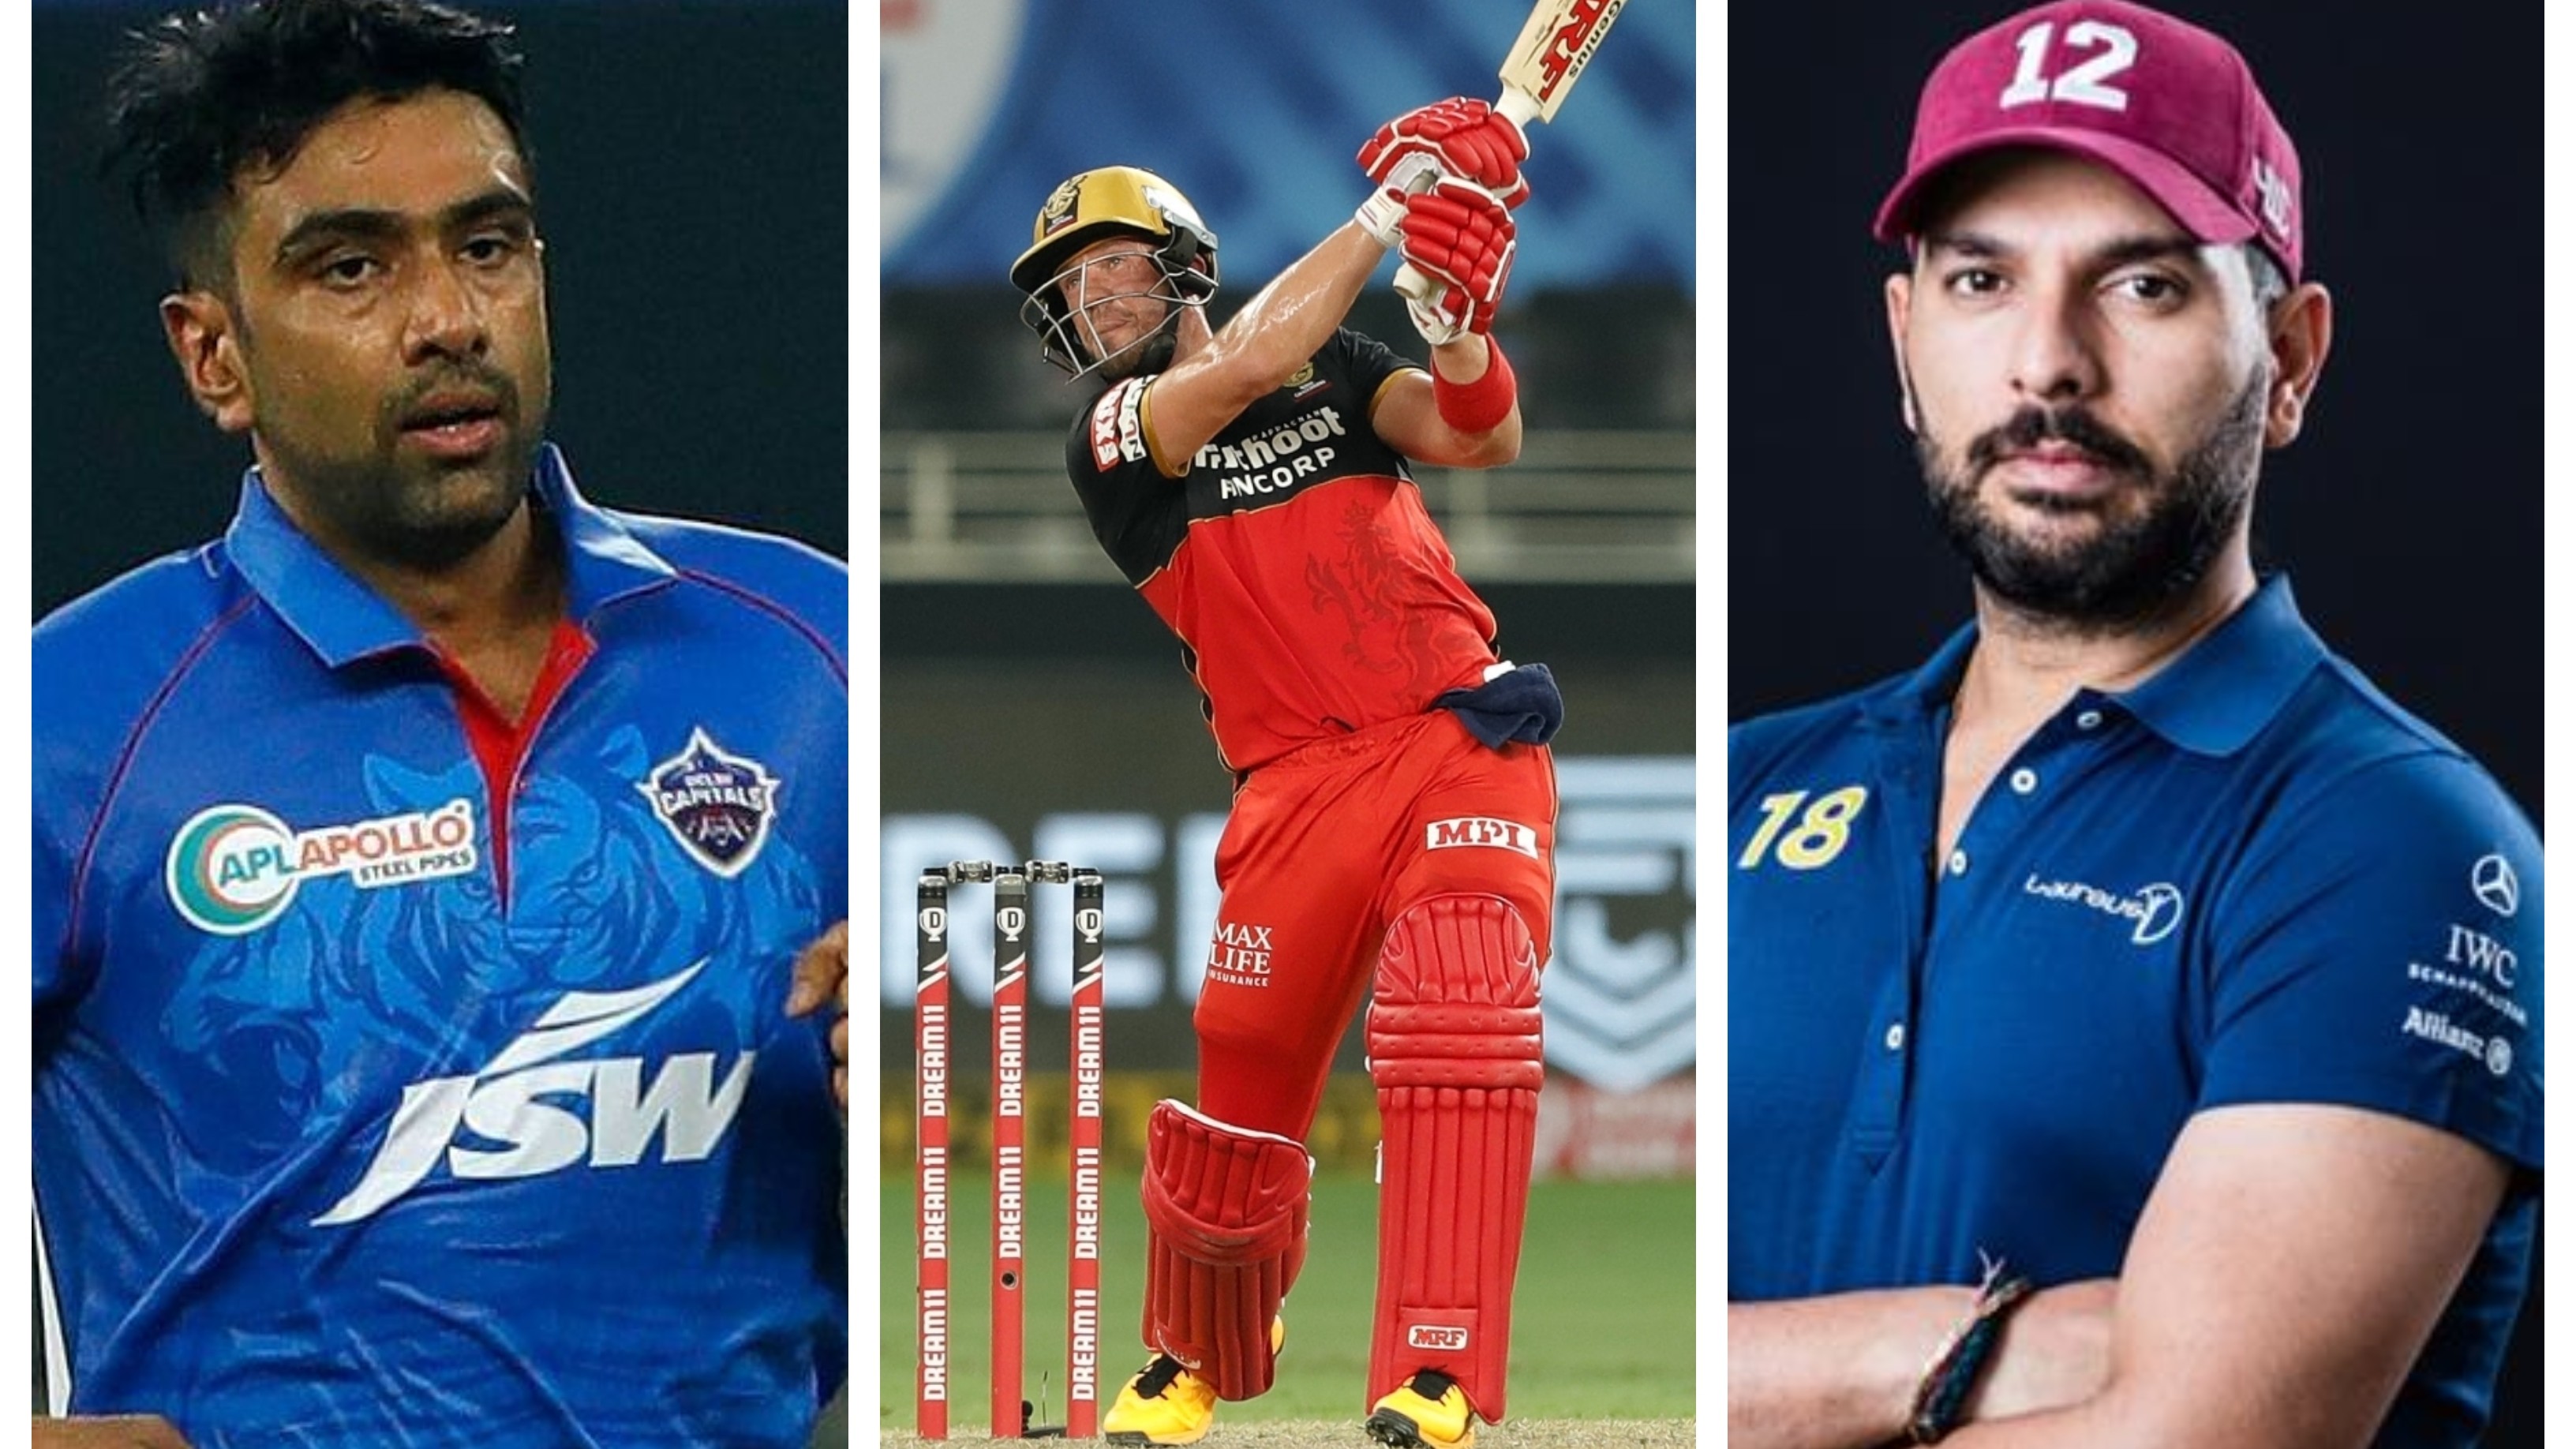 IPL 2020: Cricket fraternity reacts as AB de Villiers’ blazing 73* takes RCB to 194/2 against KKR